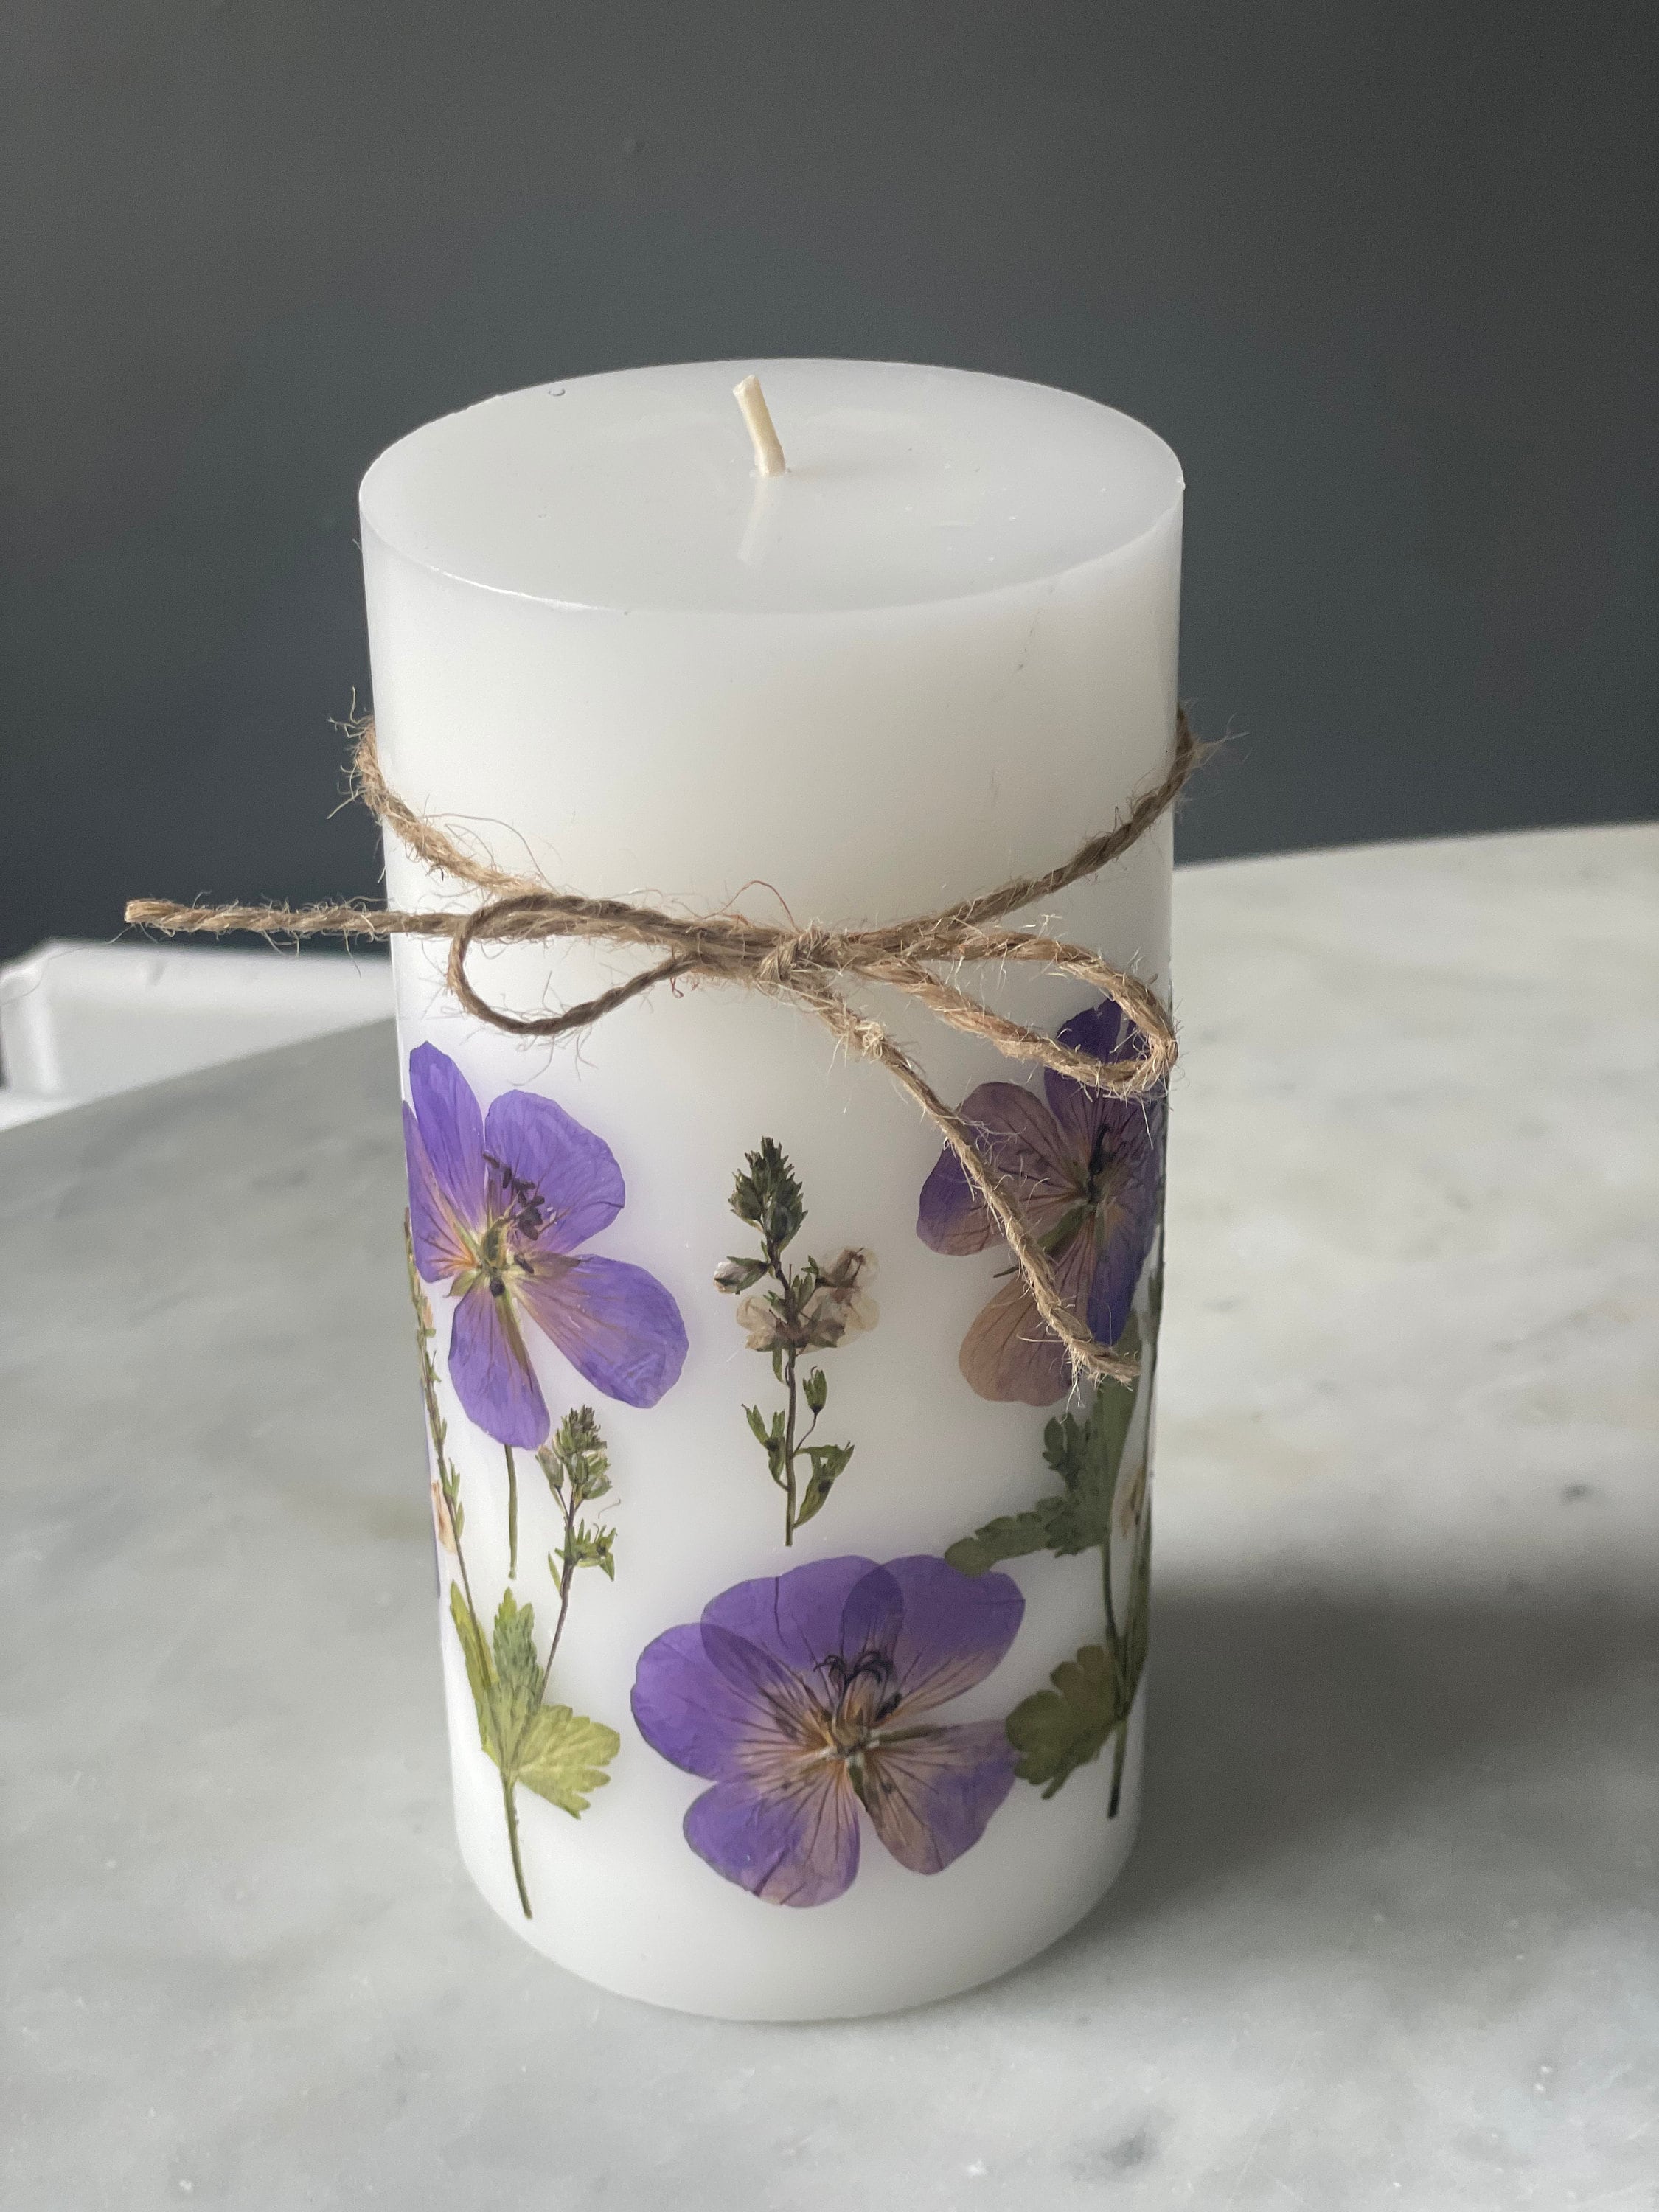  Pressed flower candles that ship for free to the US. Adding